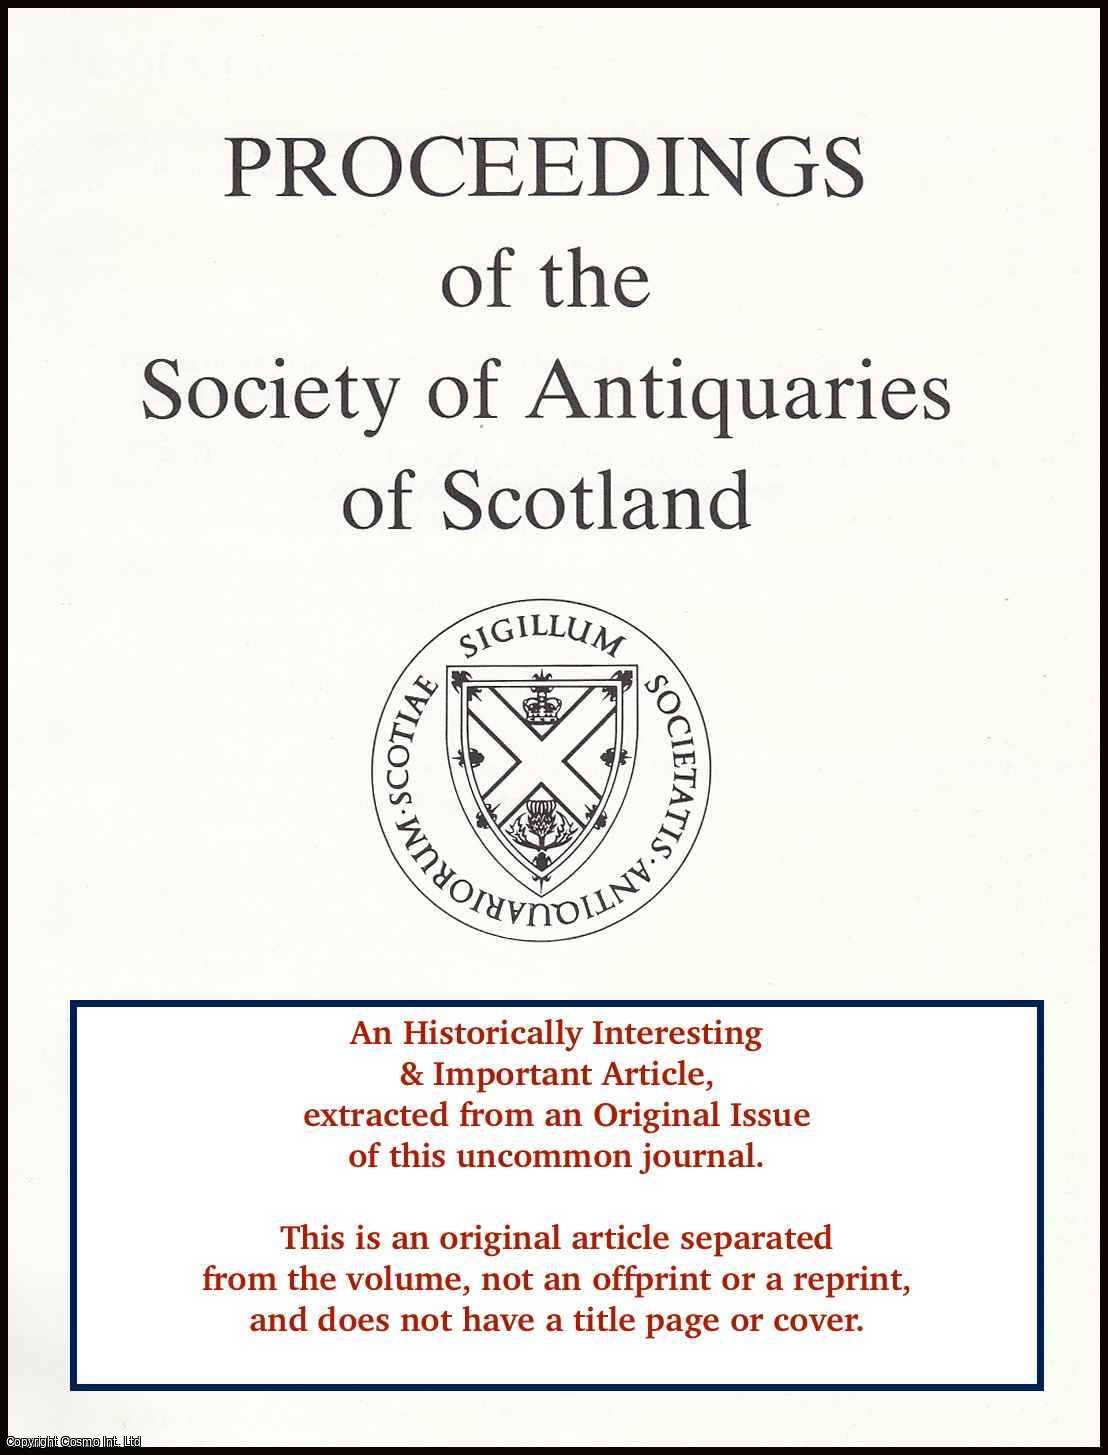 Alexander Ross - Notice of St. Clement's Church at Rowdill, Harris. An original article from the Proceedings of the Society of Antiquaries of Scotland, 1884-85.